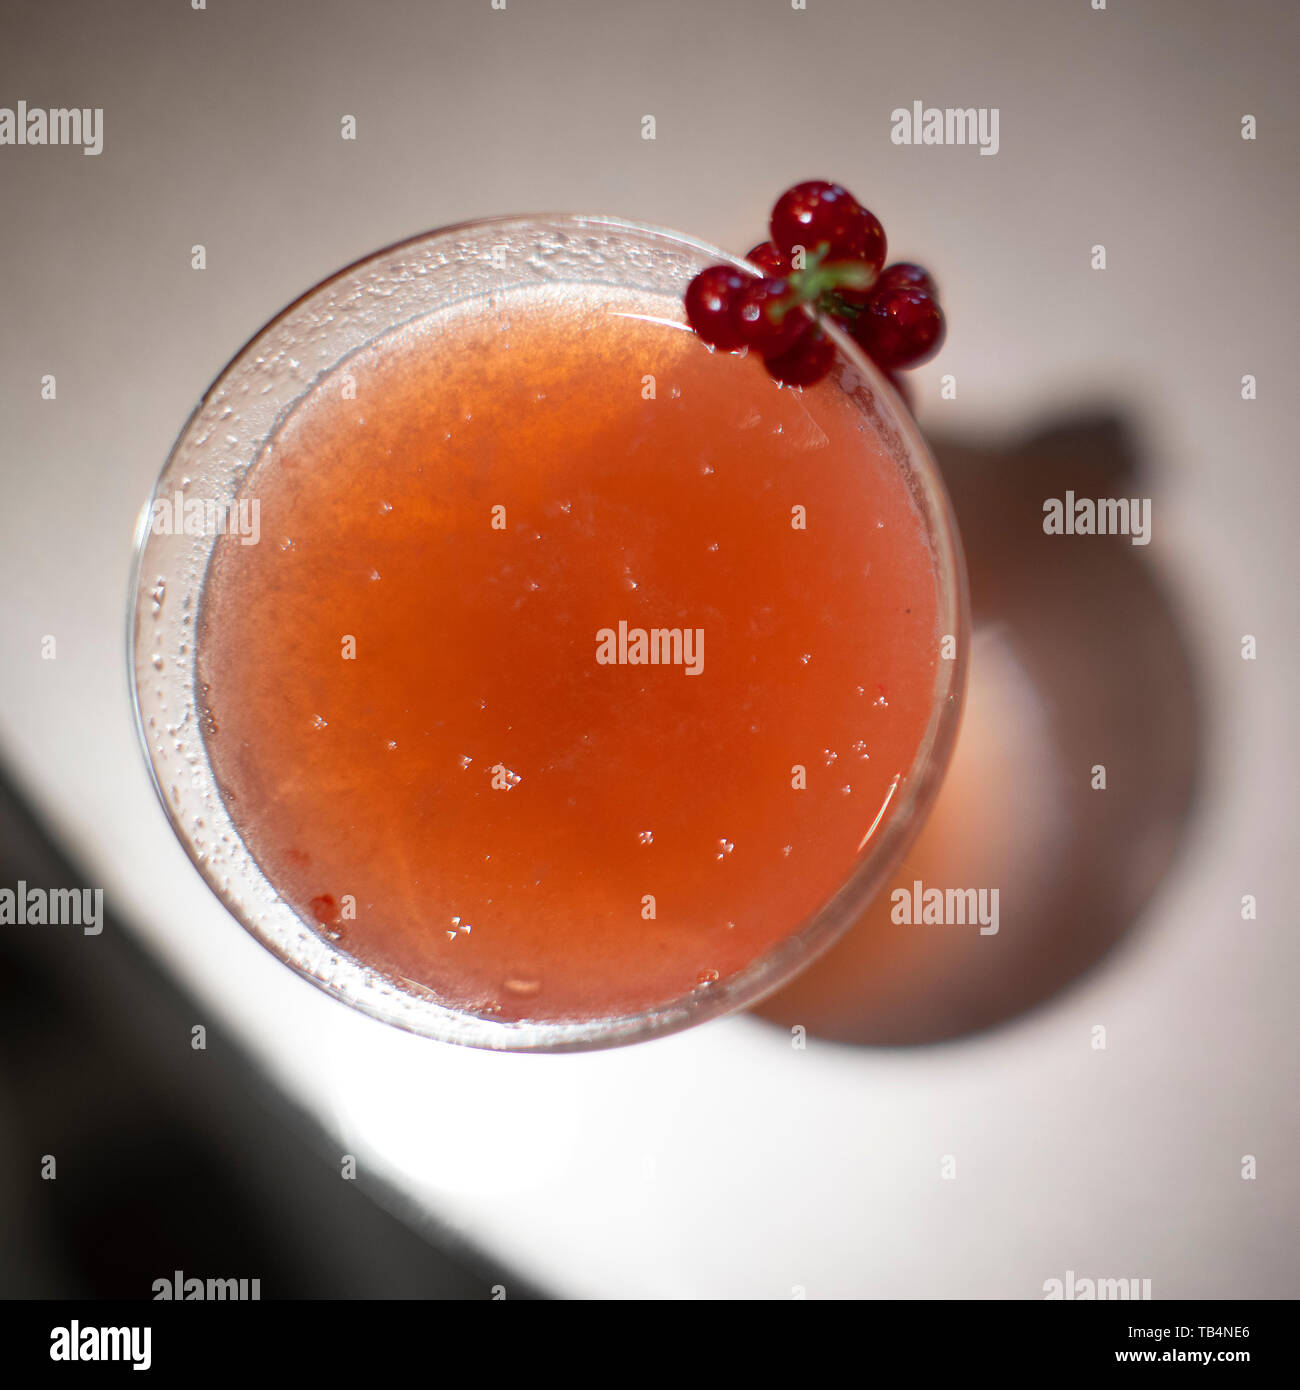 red alcoholic drink Stock Photo